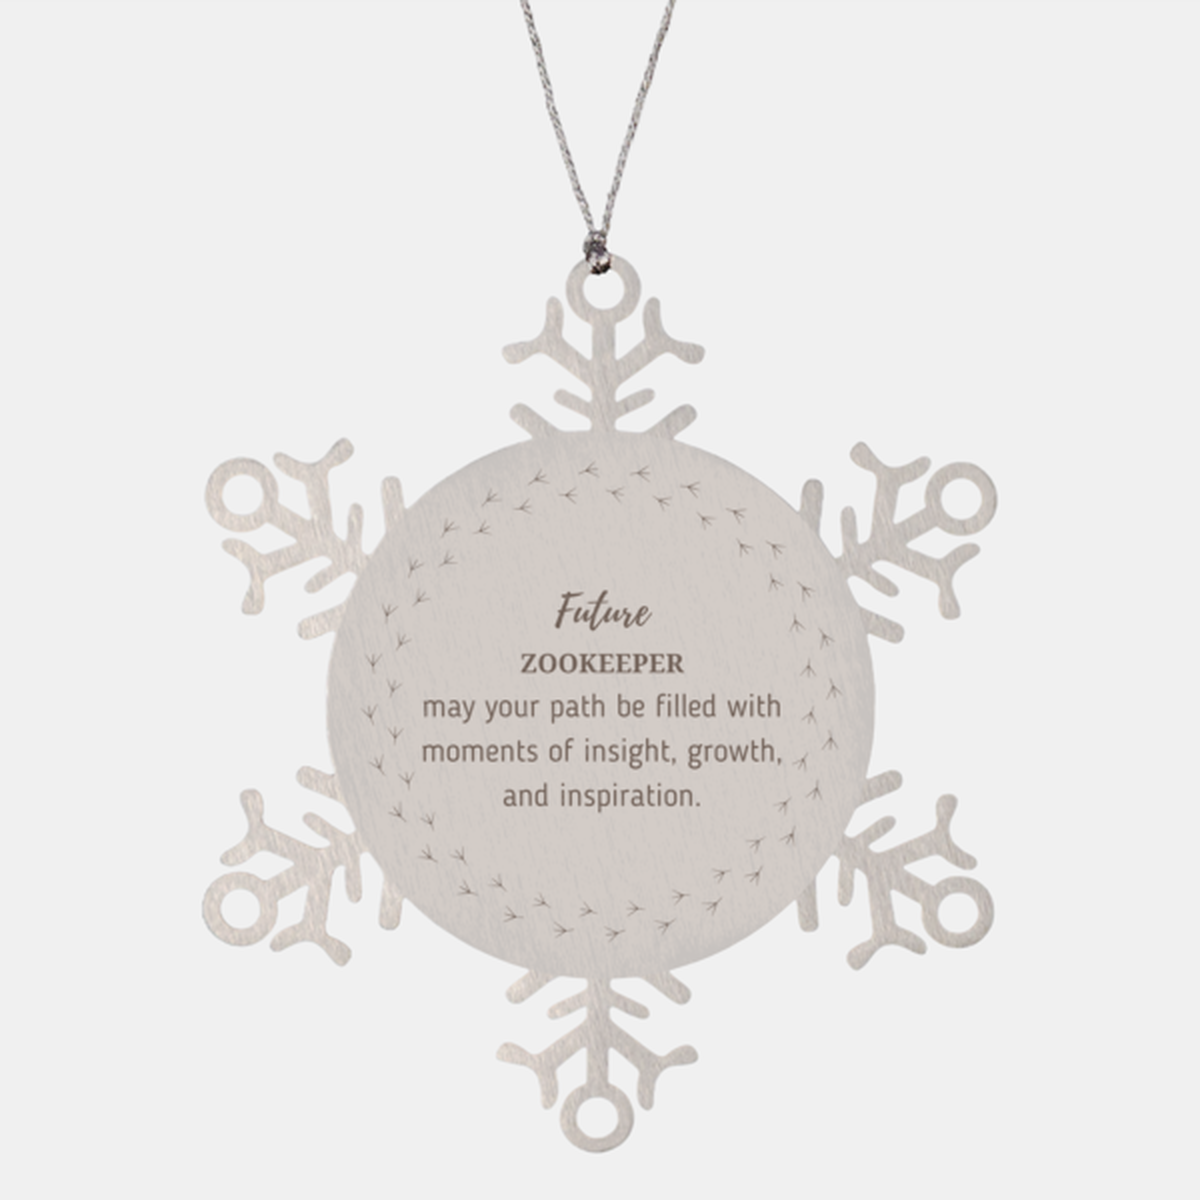 Future Zookeeper Gifts, May your path be filled with moments of insight, Graduation Gifts for New Zookeeper, Christmas Unique Snowflake Ornament For Men, Women, Friends